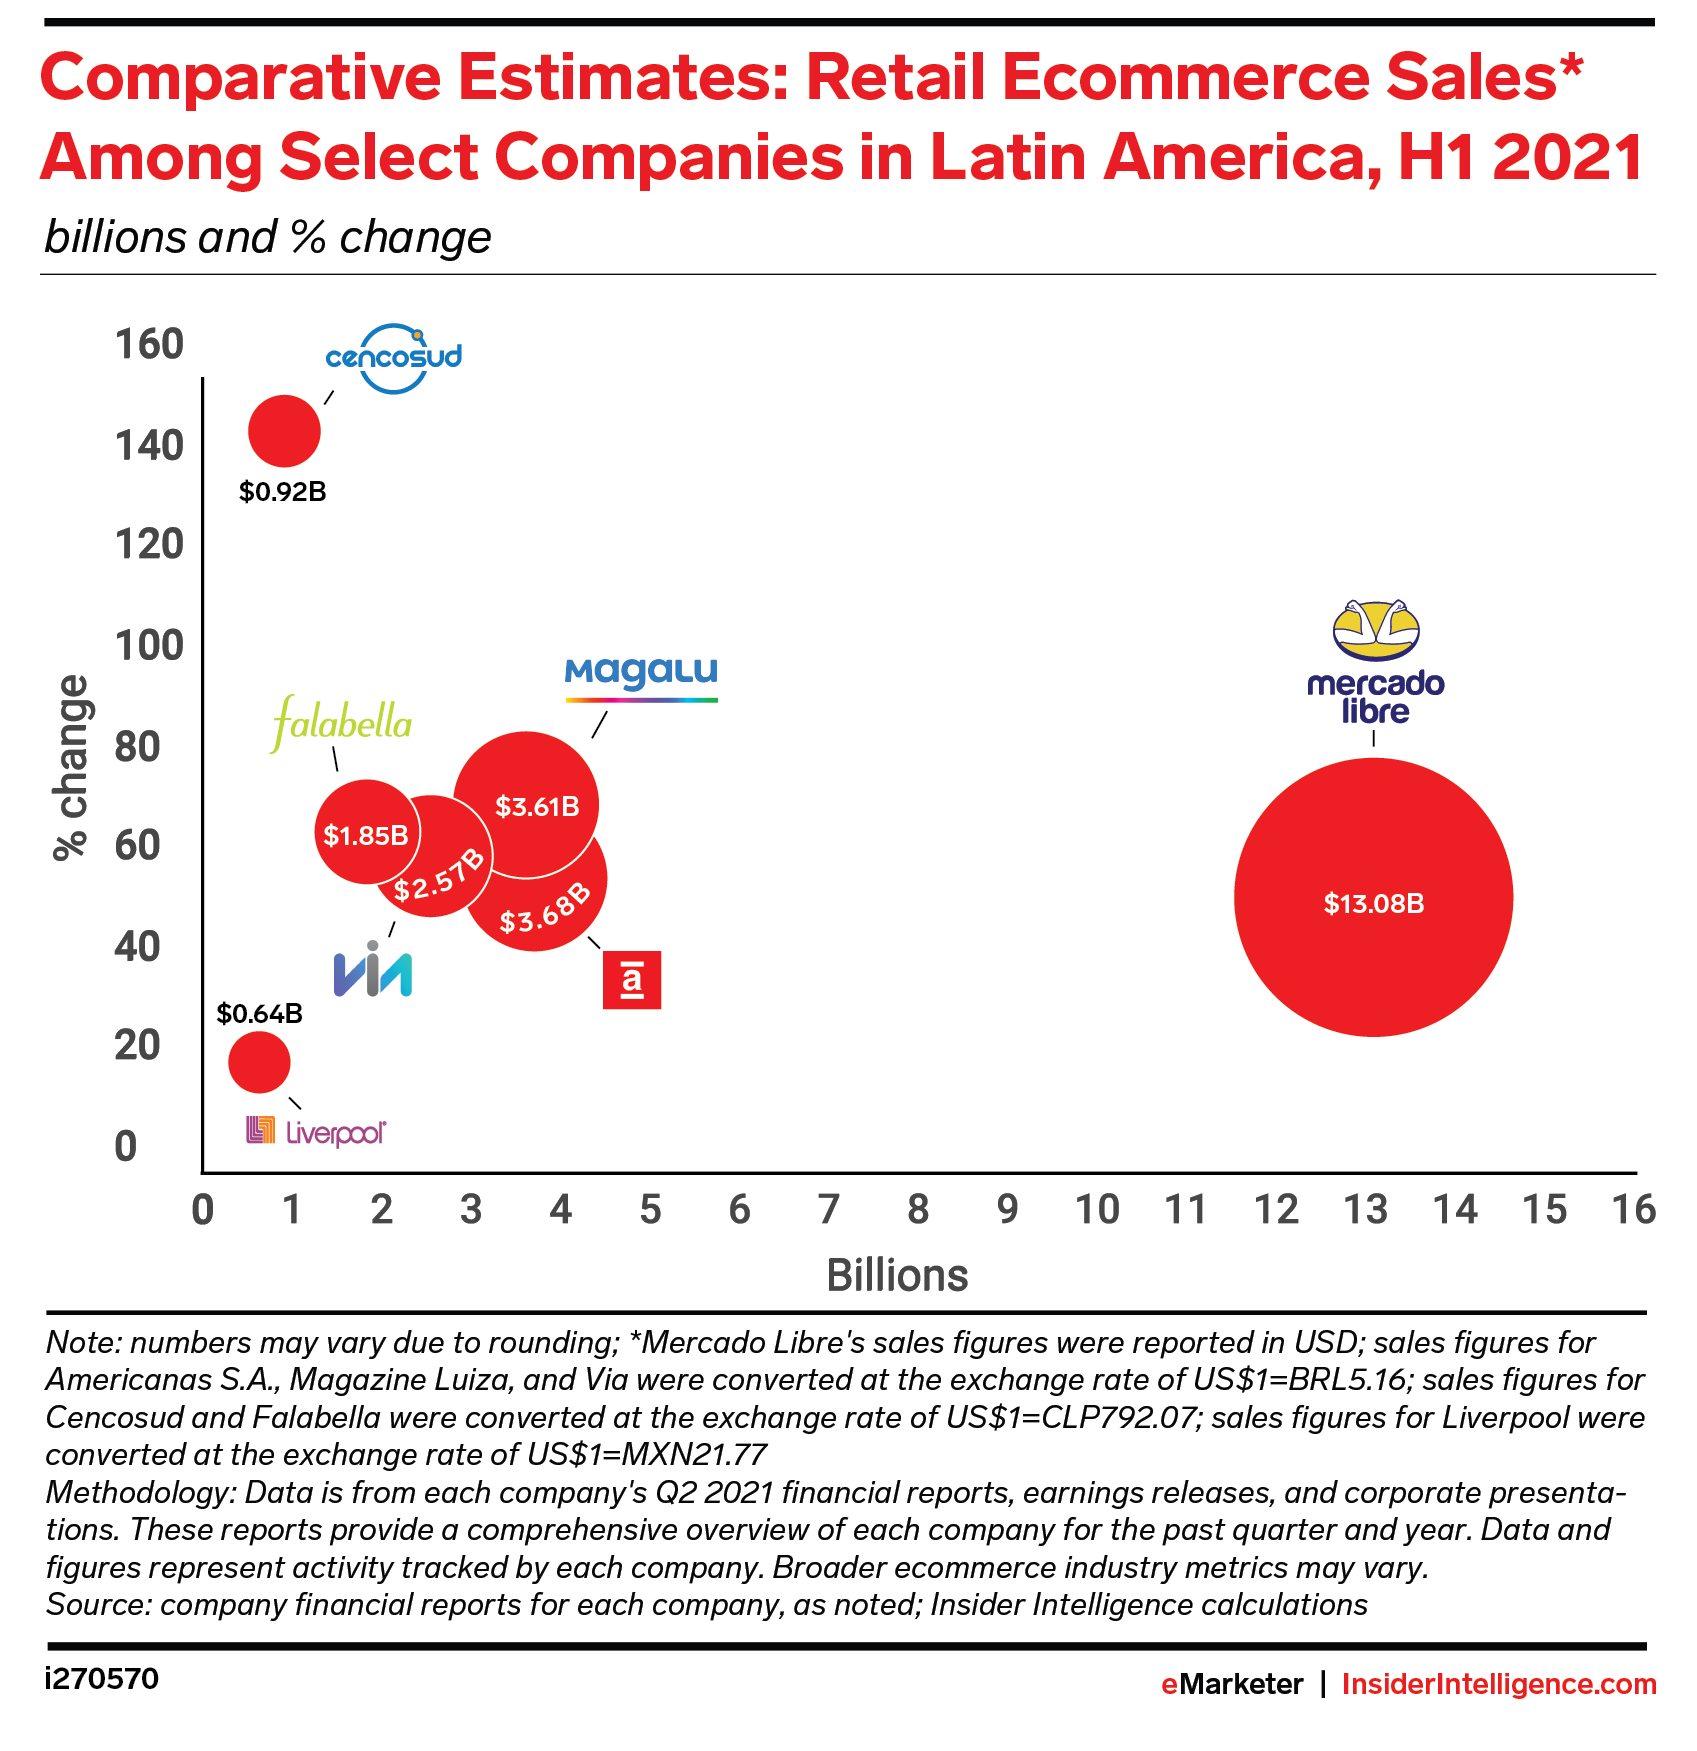 Comparative Estimates: Retail Ecommerce Sales* Among Select Companies in Latin America, H1 2021 (billions and % change)